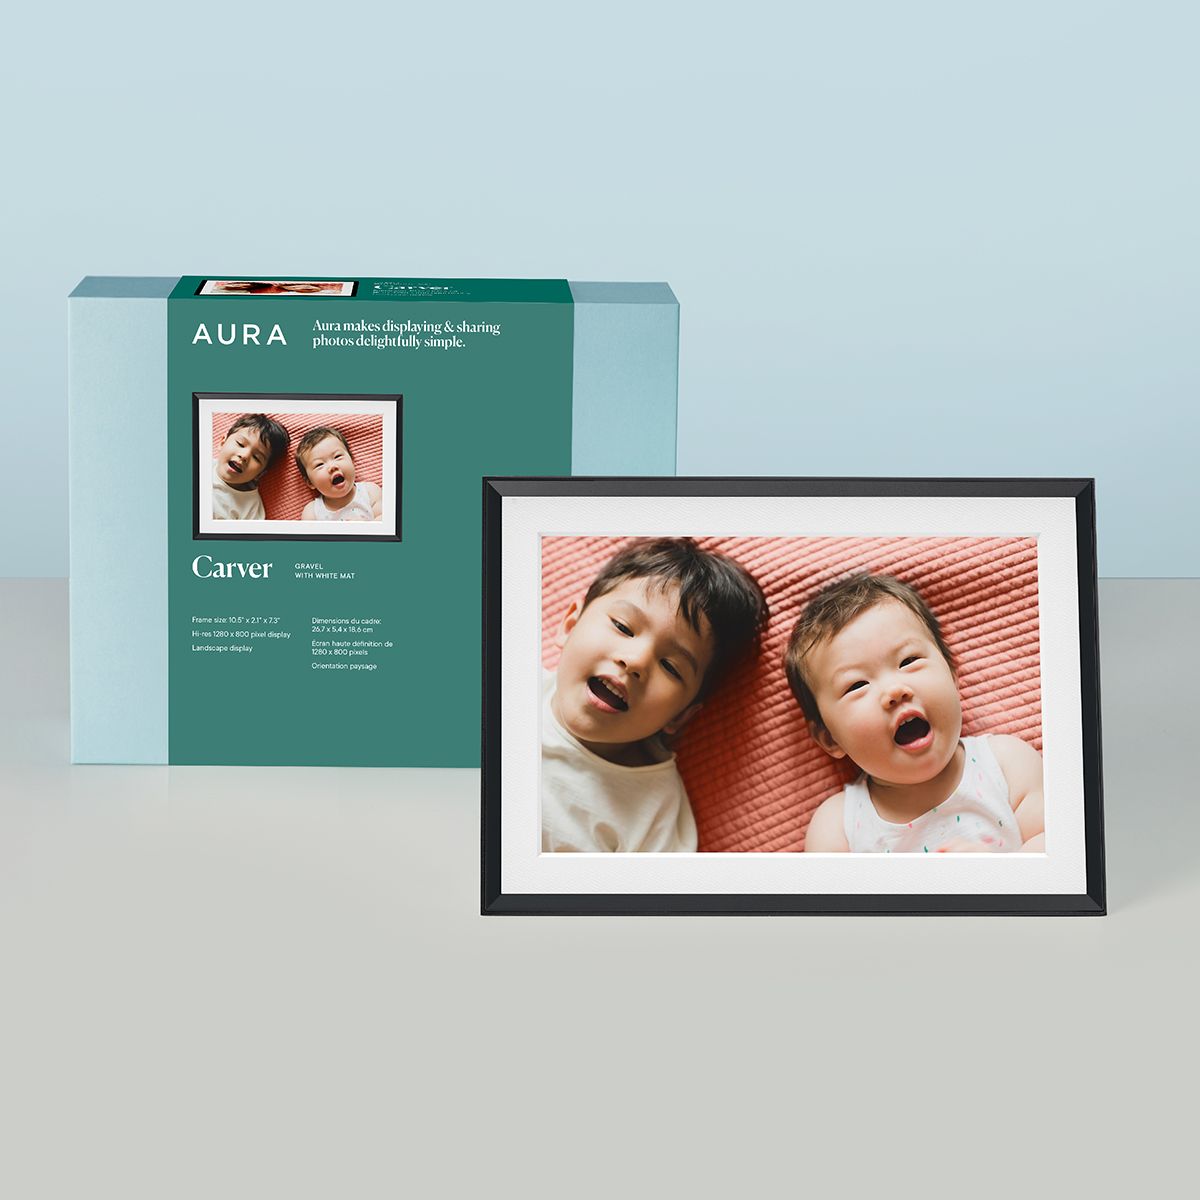 Aura Carver 10.1" Digital Picture Frame | The Container Store